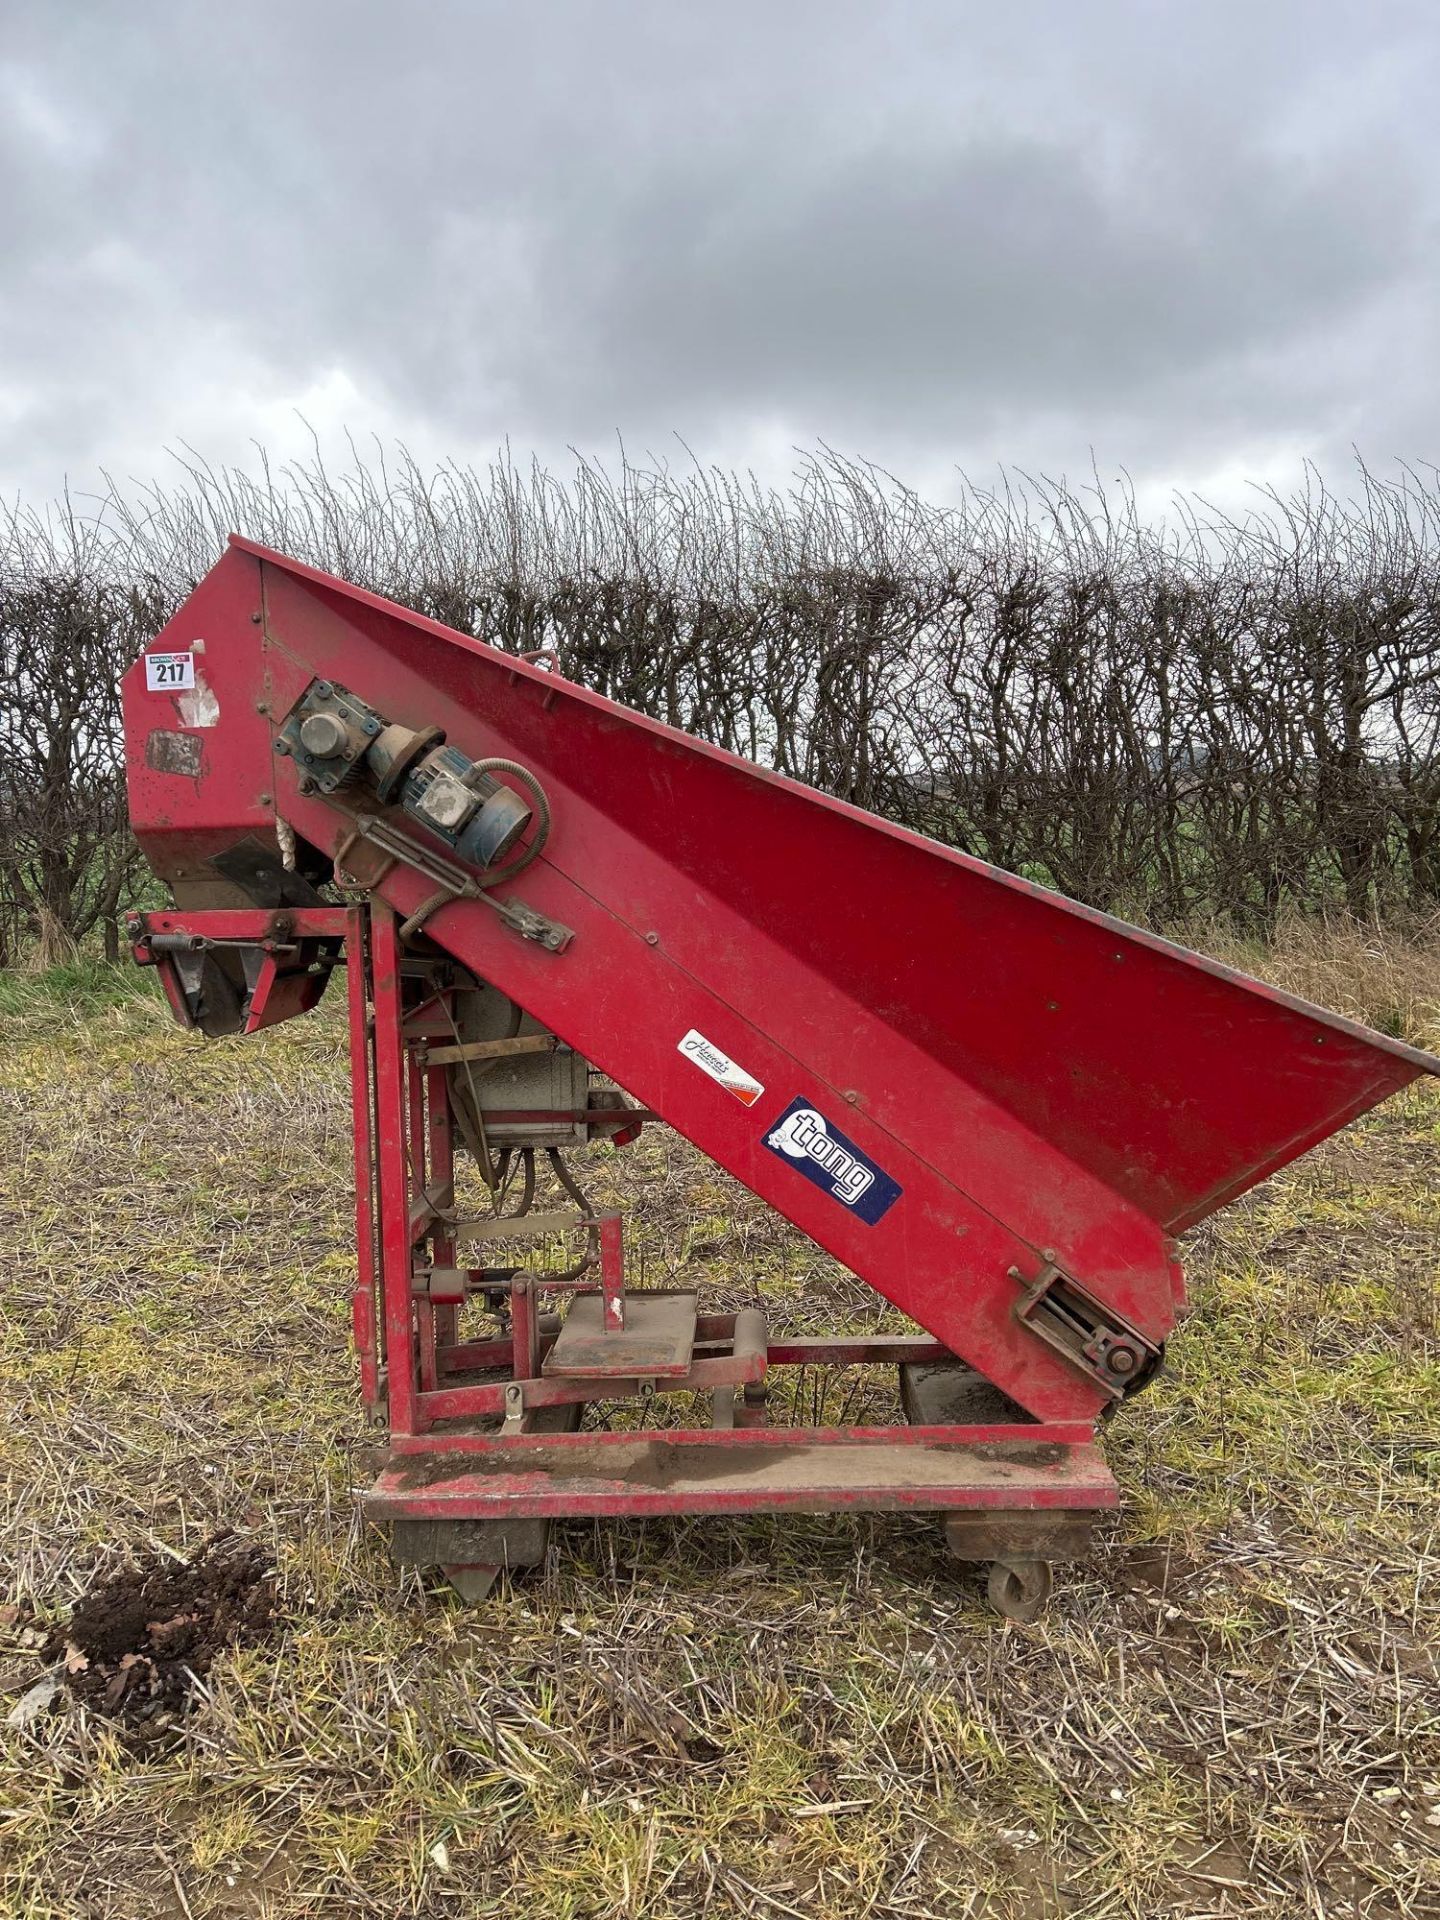 Tong weigher bagger (for spares or repair). Serial No: 833042